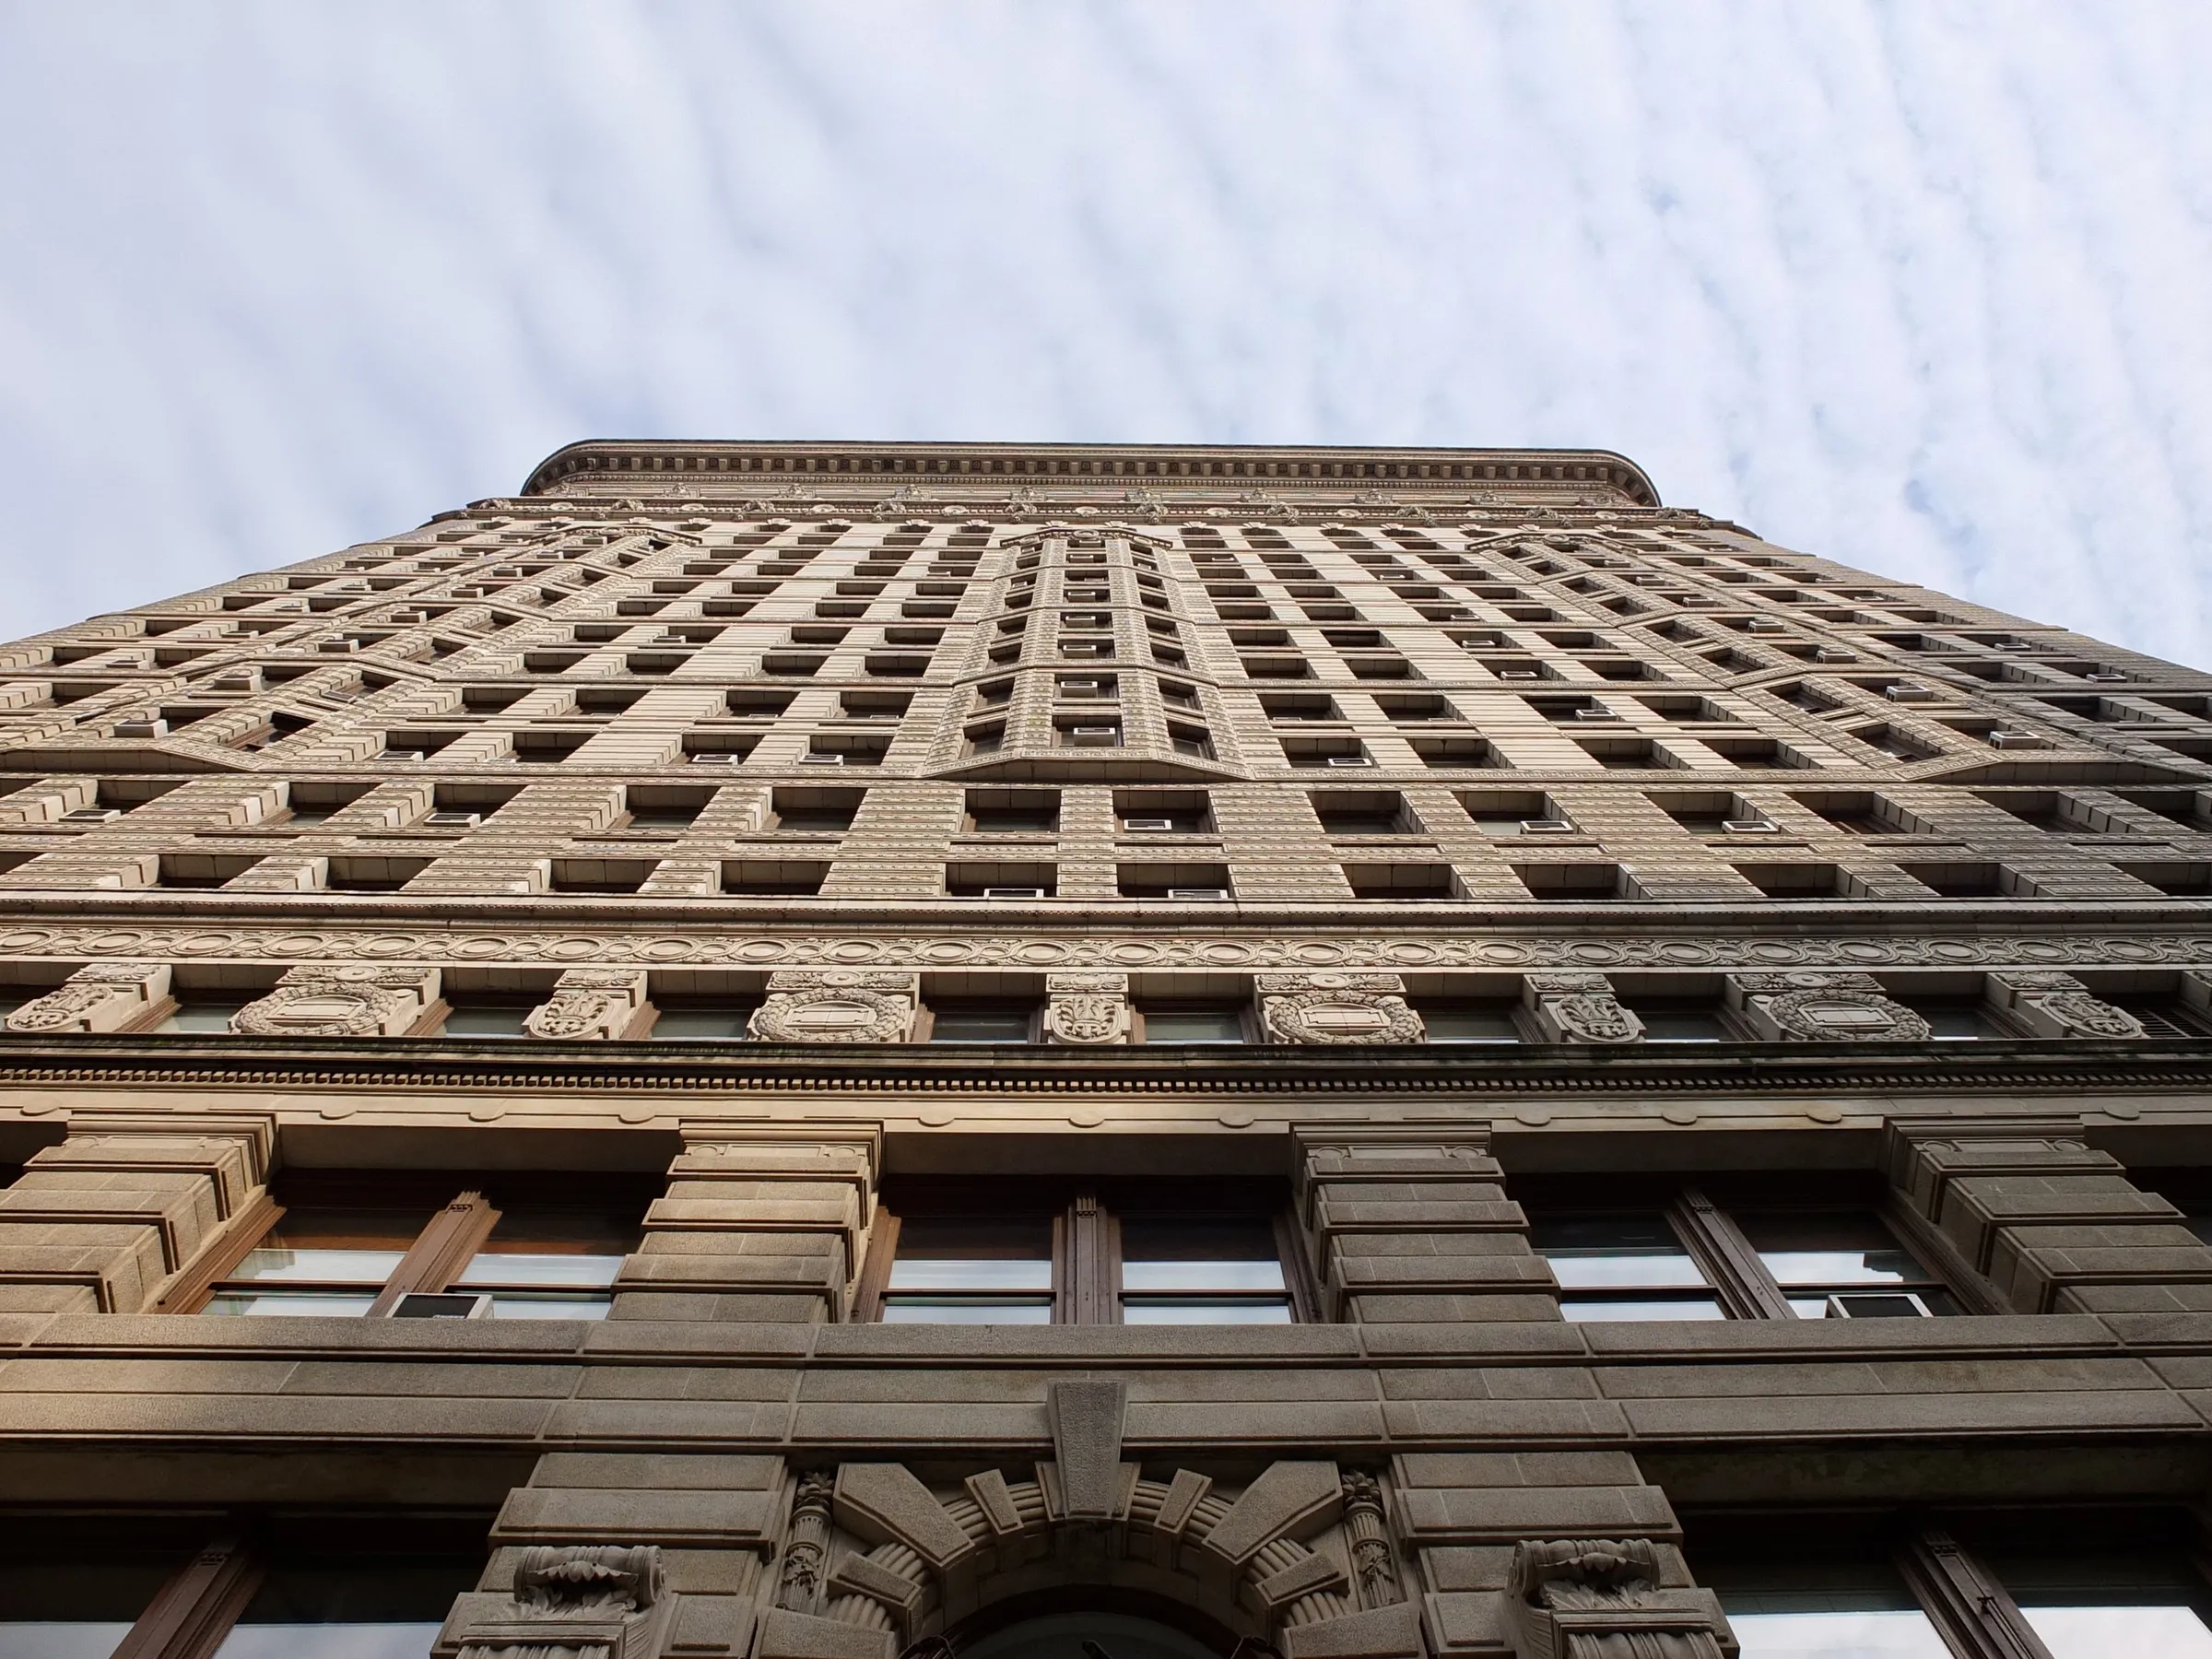 Pillowy clouds cover a blue sky above the west facade of the Flatiron building. Looking up the structure is filled with ornate details: carved stone, patterned brickwork, protruding bay windows.